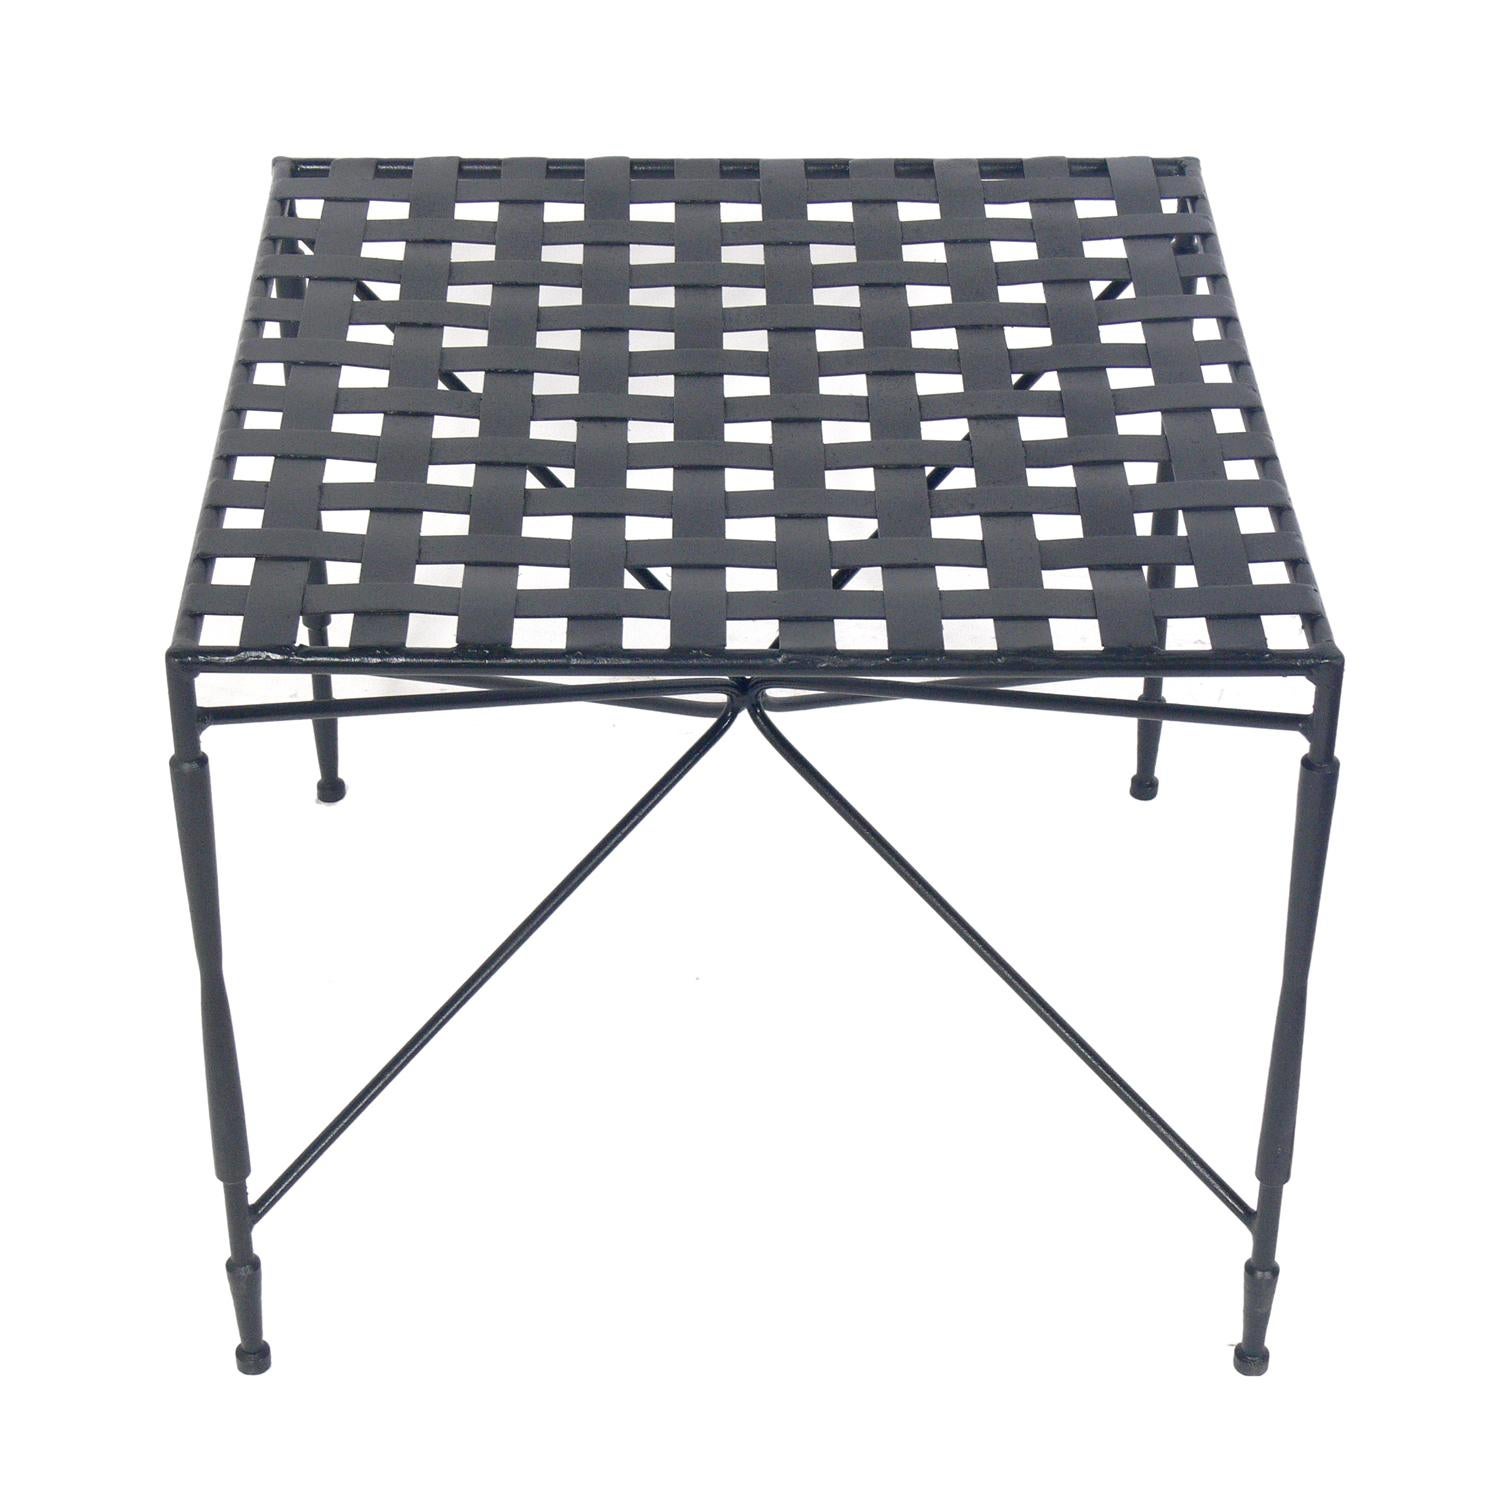 Sculptural iron coffee table, designed by Mario Papperzini for Salterini, Italian, circa 1960s. This is a versatile form and it can be used indoors or outdoors. This design was used by Yves Saint Laurent in his personal residence at la Rue de